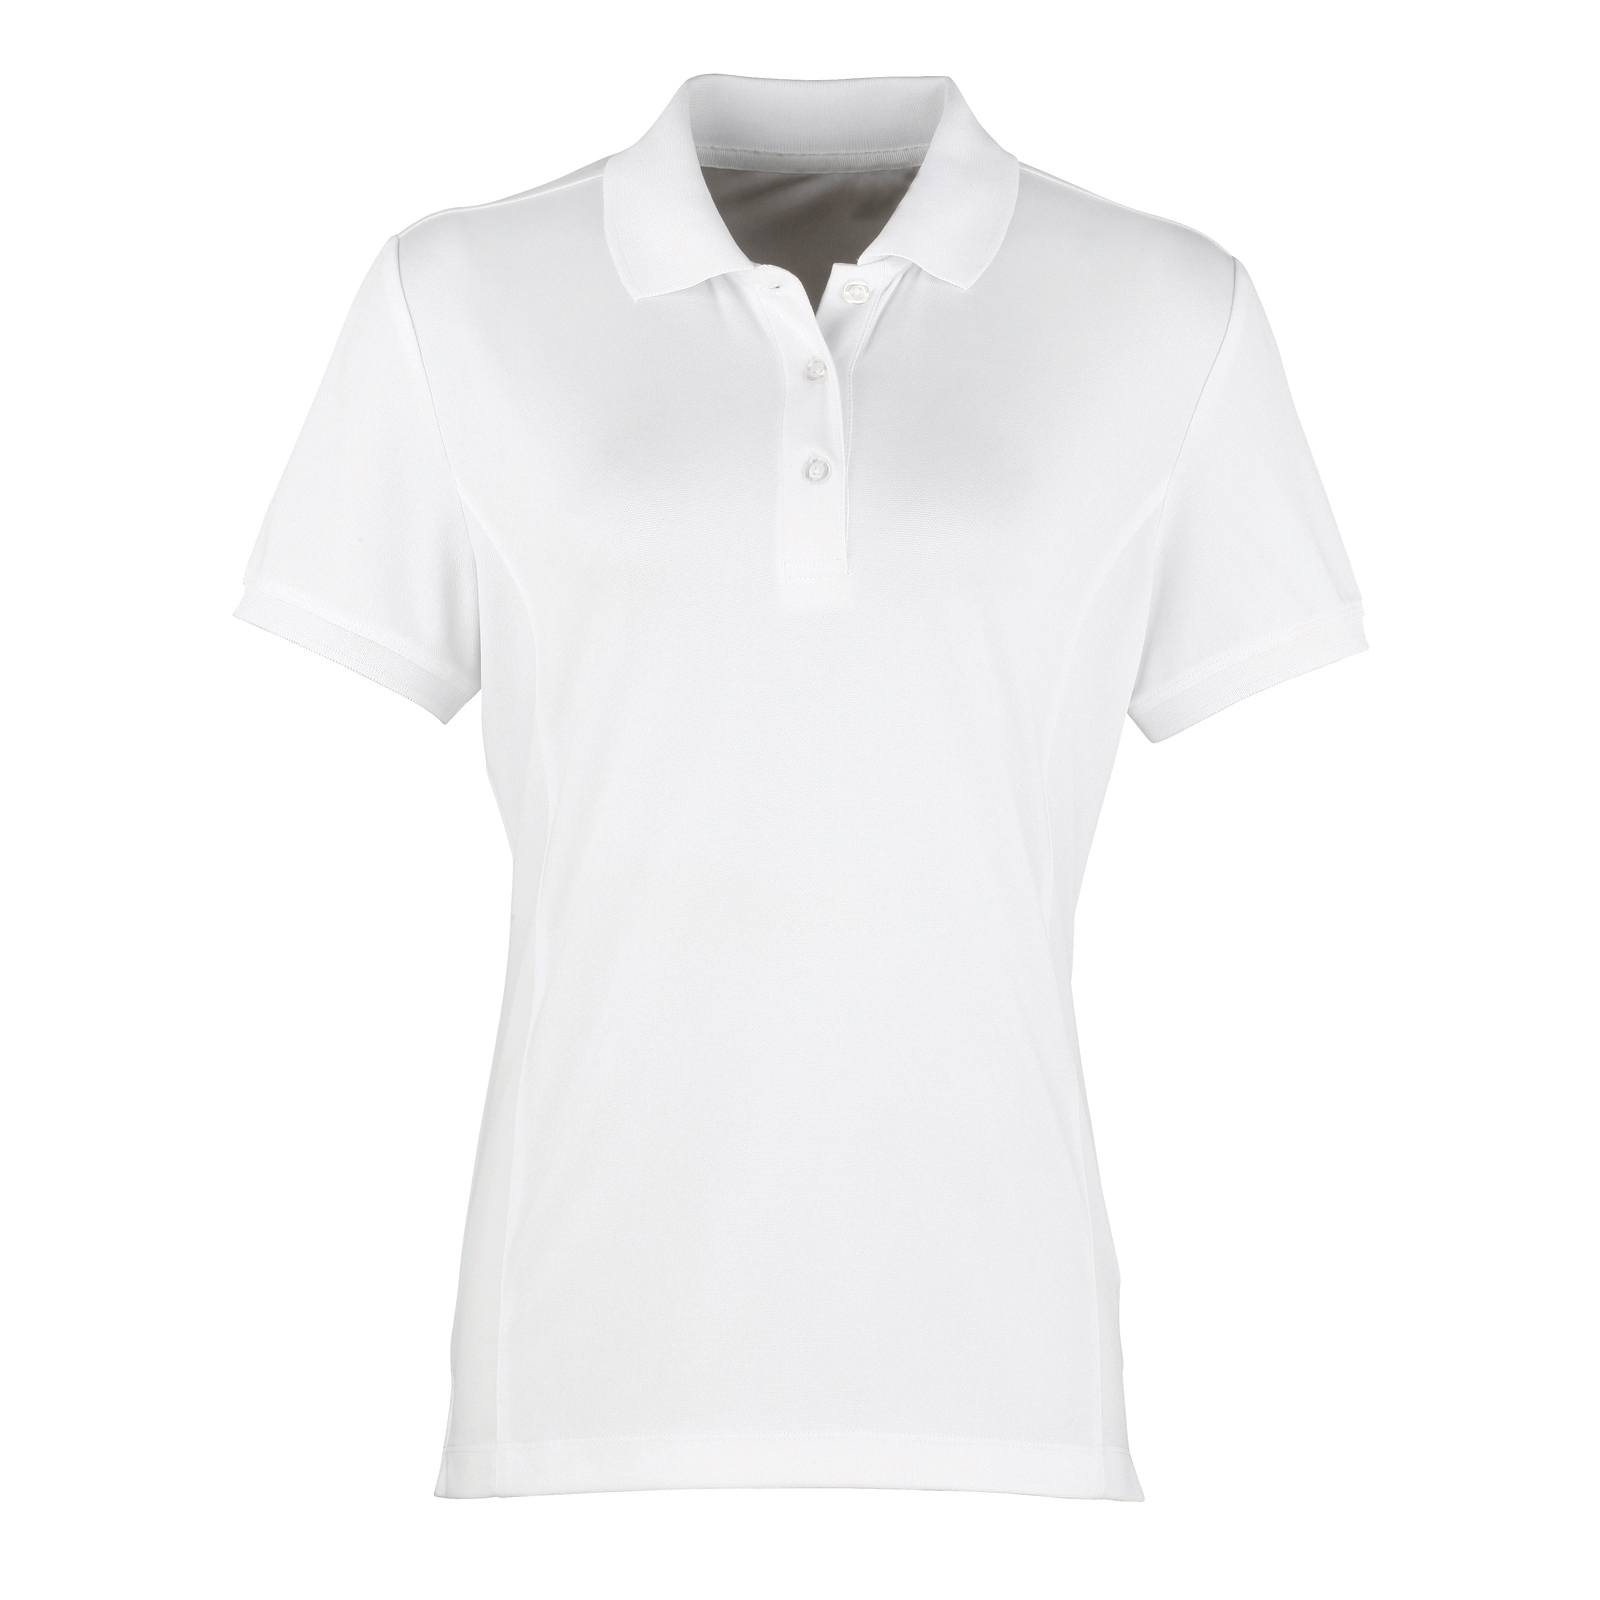 ax-httpswebsystems.s3.amazonaws.comtmp_for_downloadpremier-ladies-coolchecker-pique-polo-white.jpg